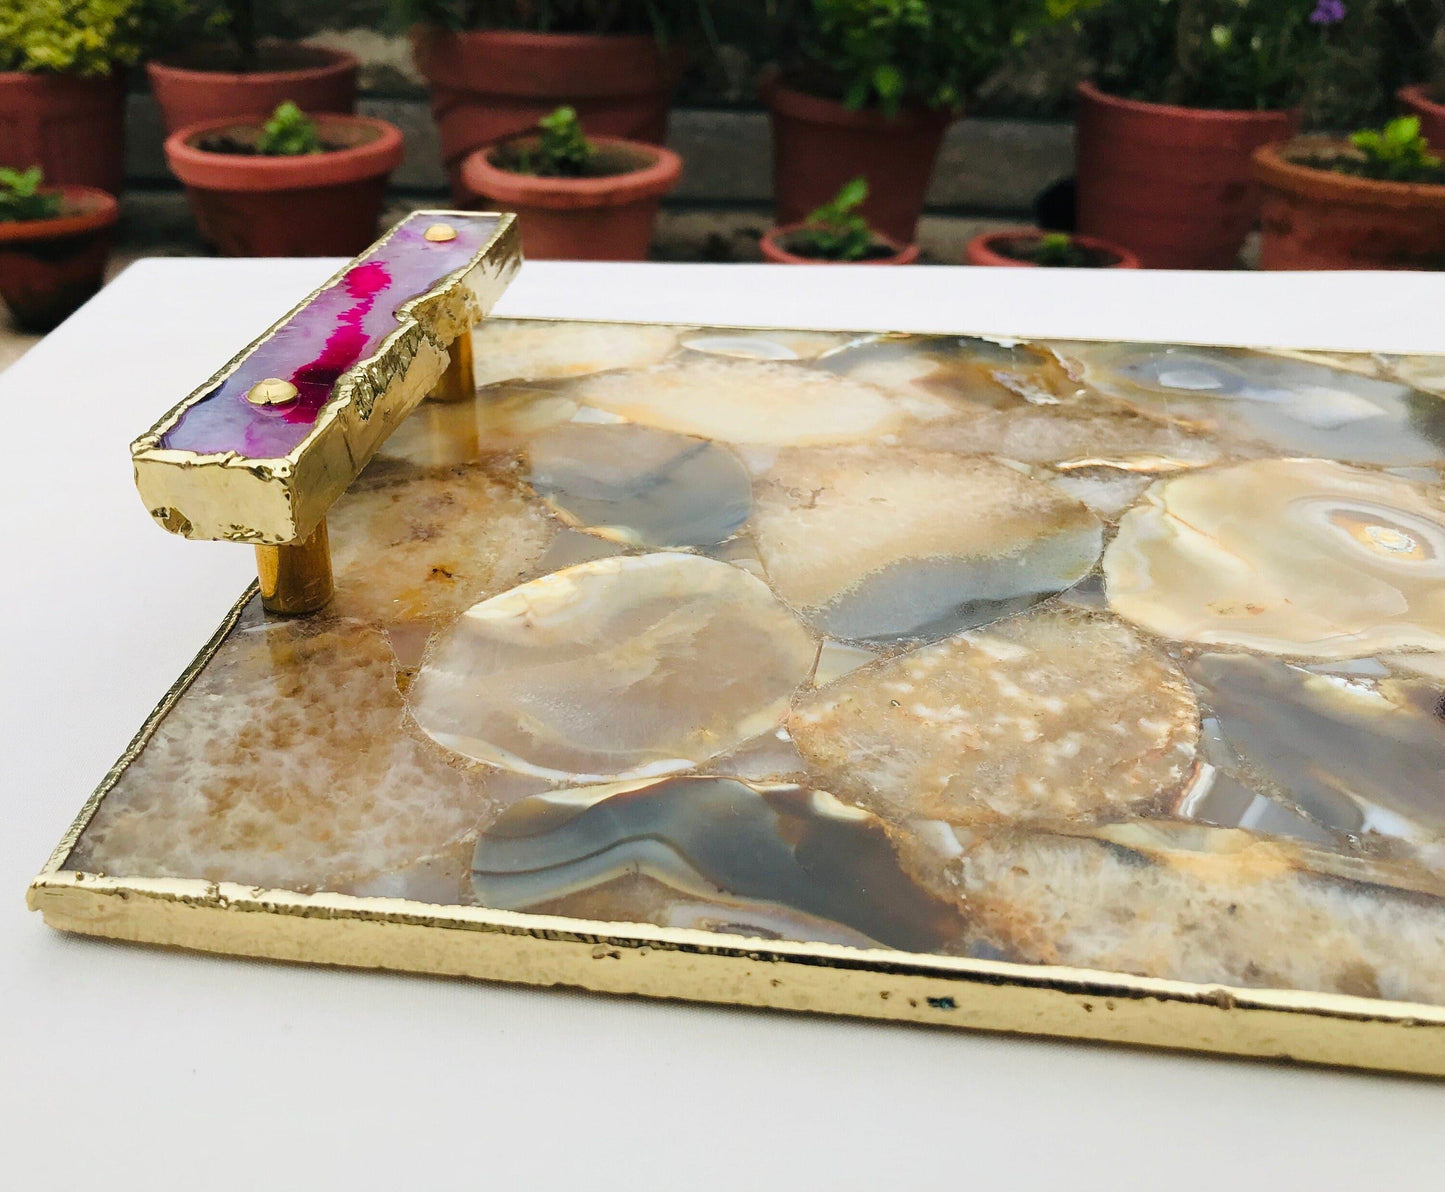 Brown Plated Agate Serving Tray With Pink Onyx Agate Handles - MAIA HOMES